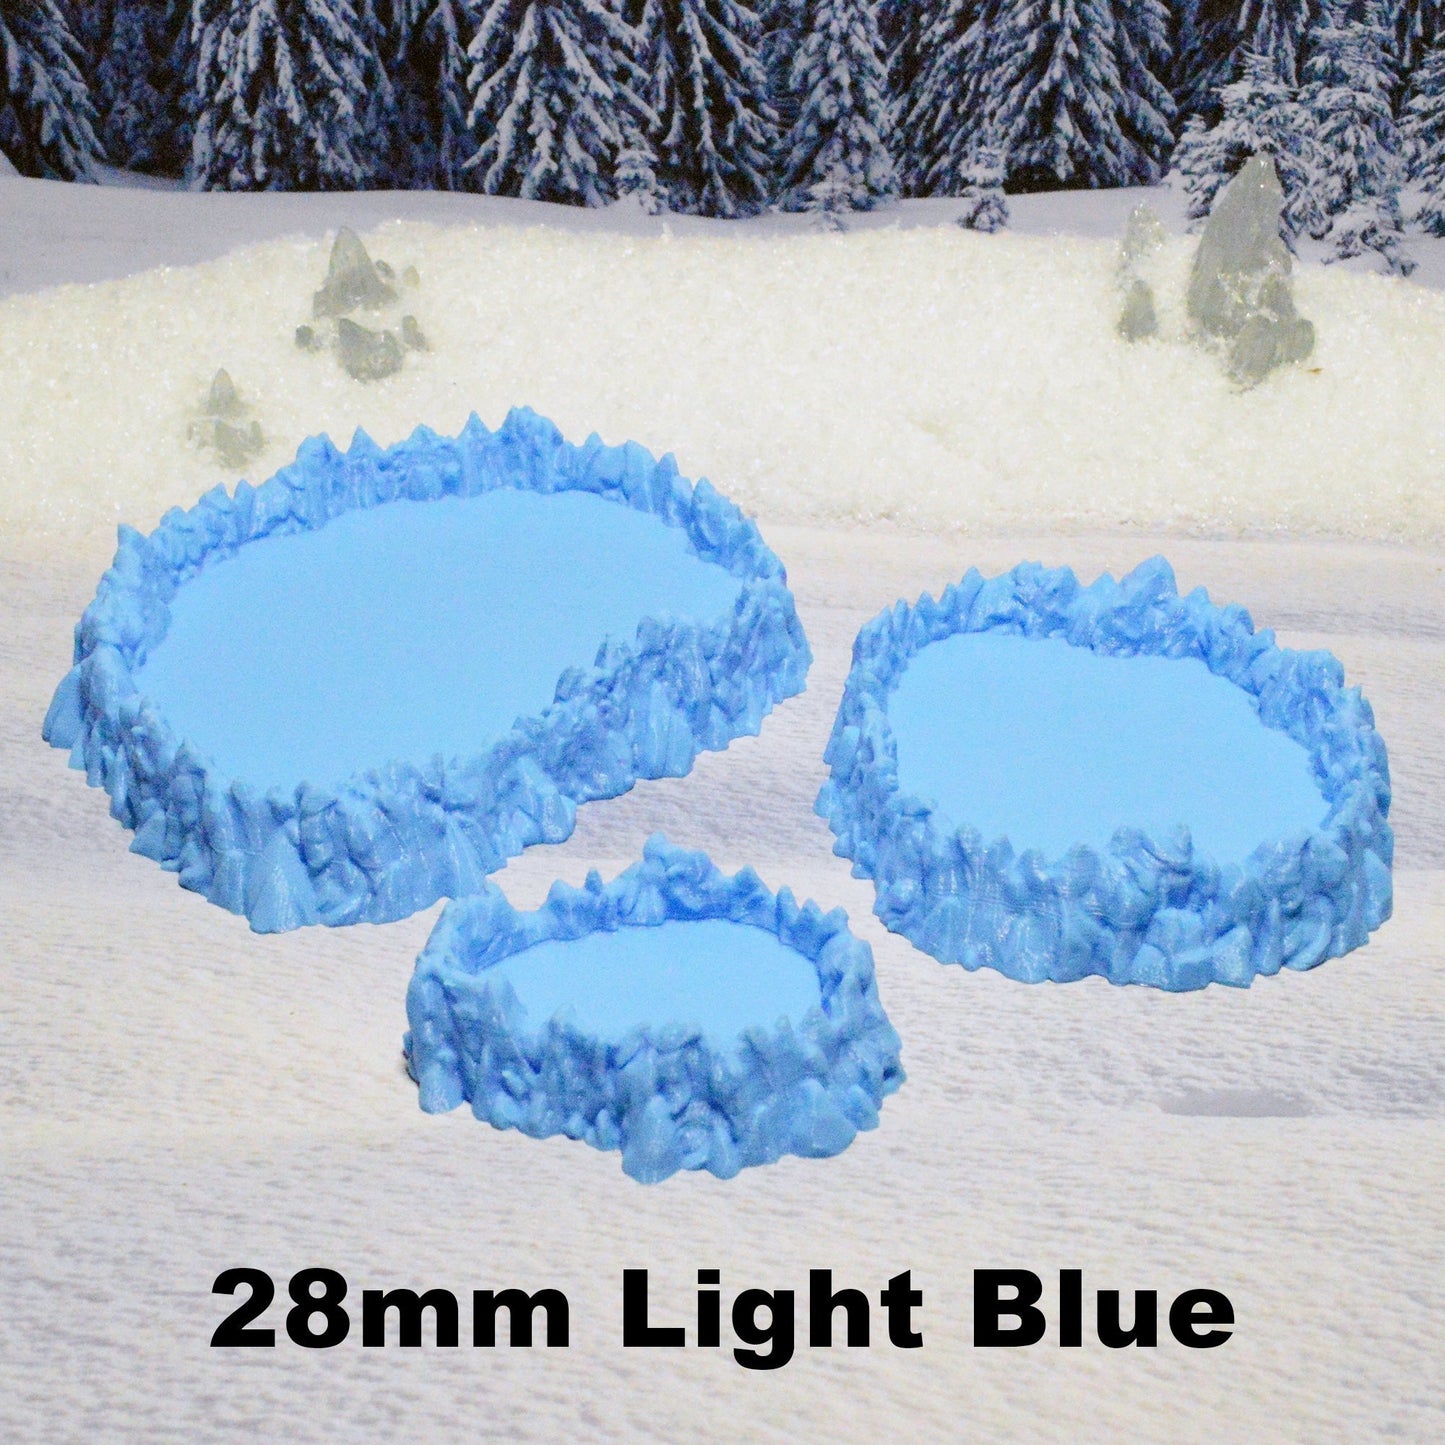 Icy Pits 15mm 28mm for D&D Terrain, DnD Pathfinder Frozen Ponds, Frostgrave, Icewind Dale